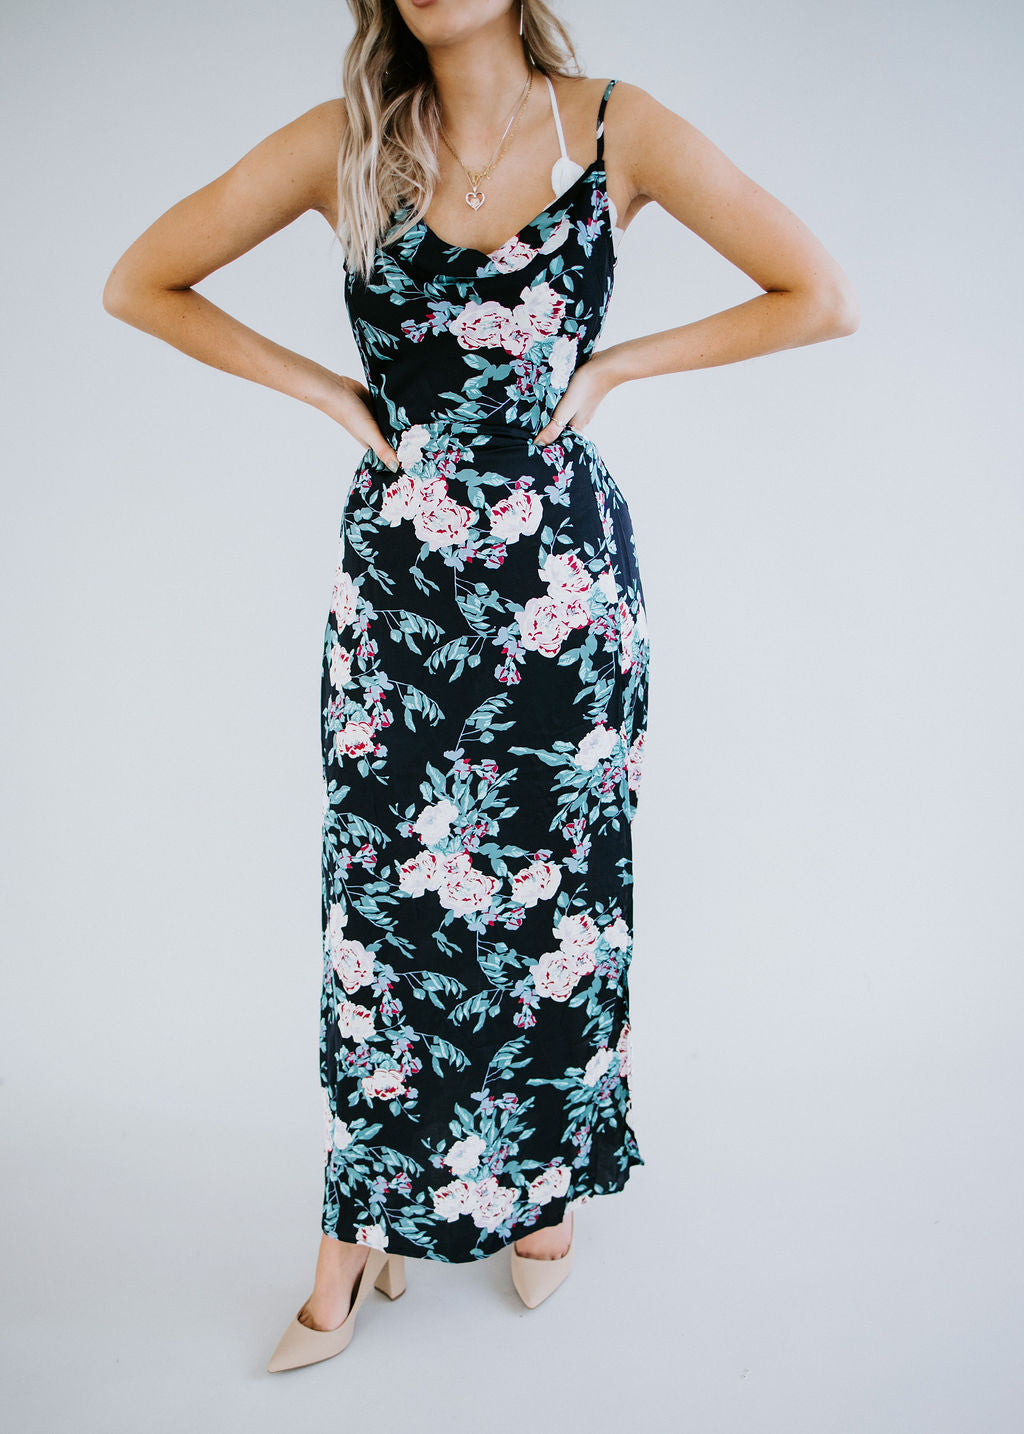 Blooming Beauty Floral Maxi Dress